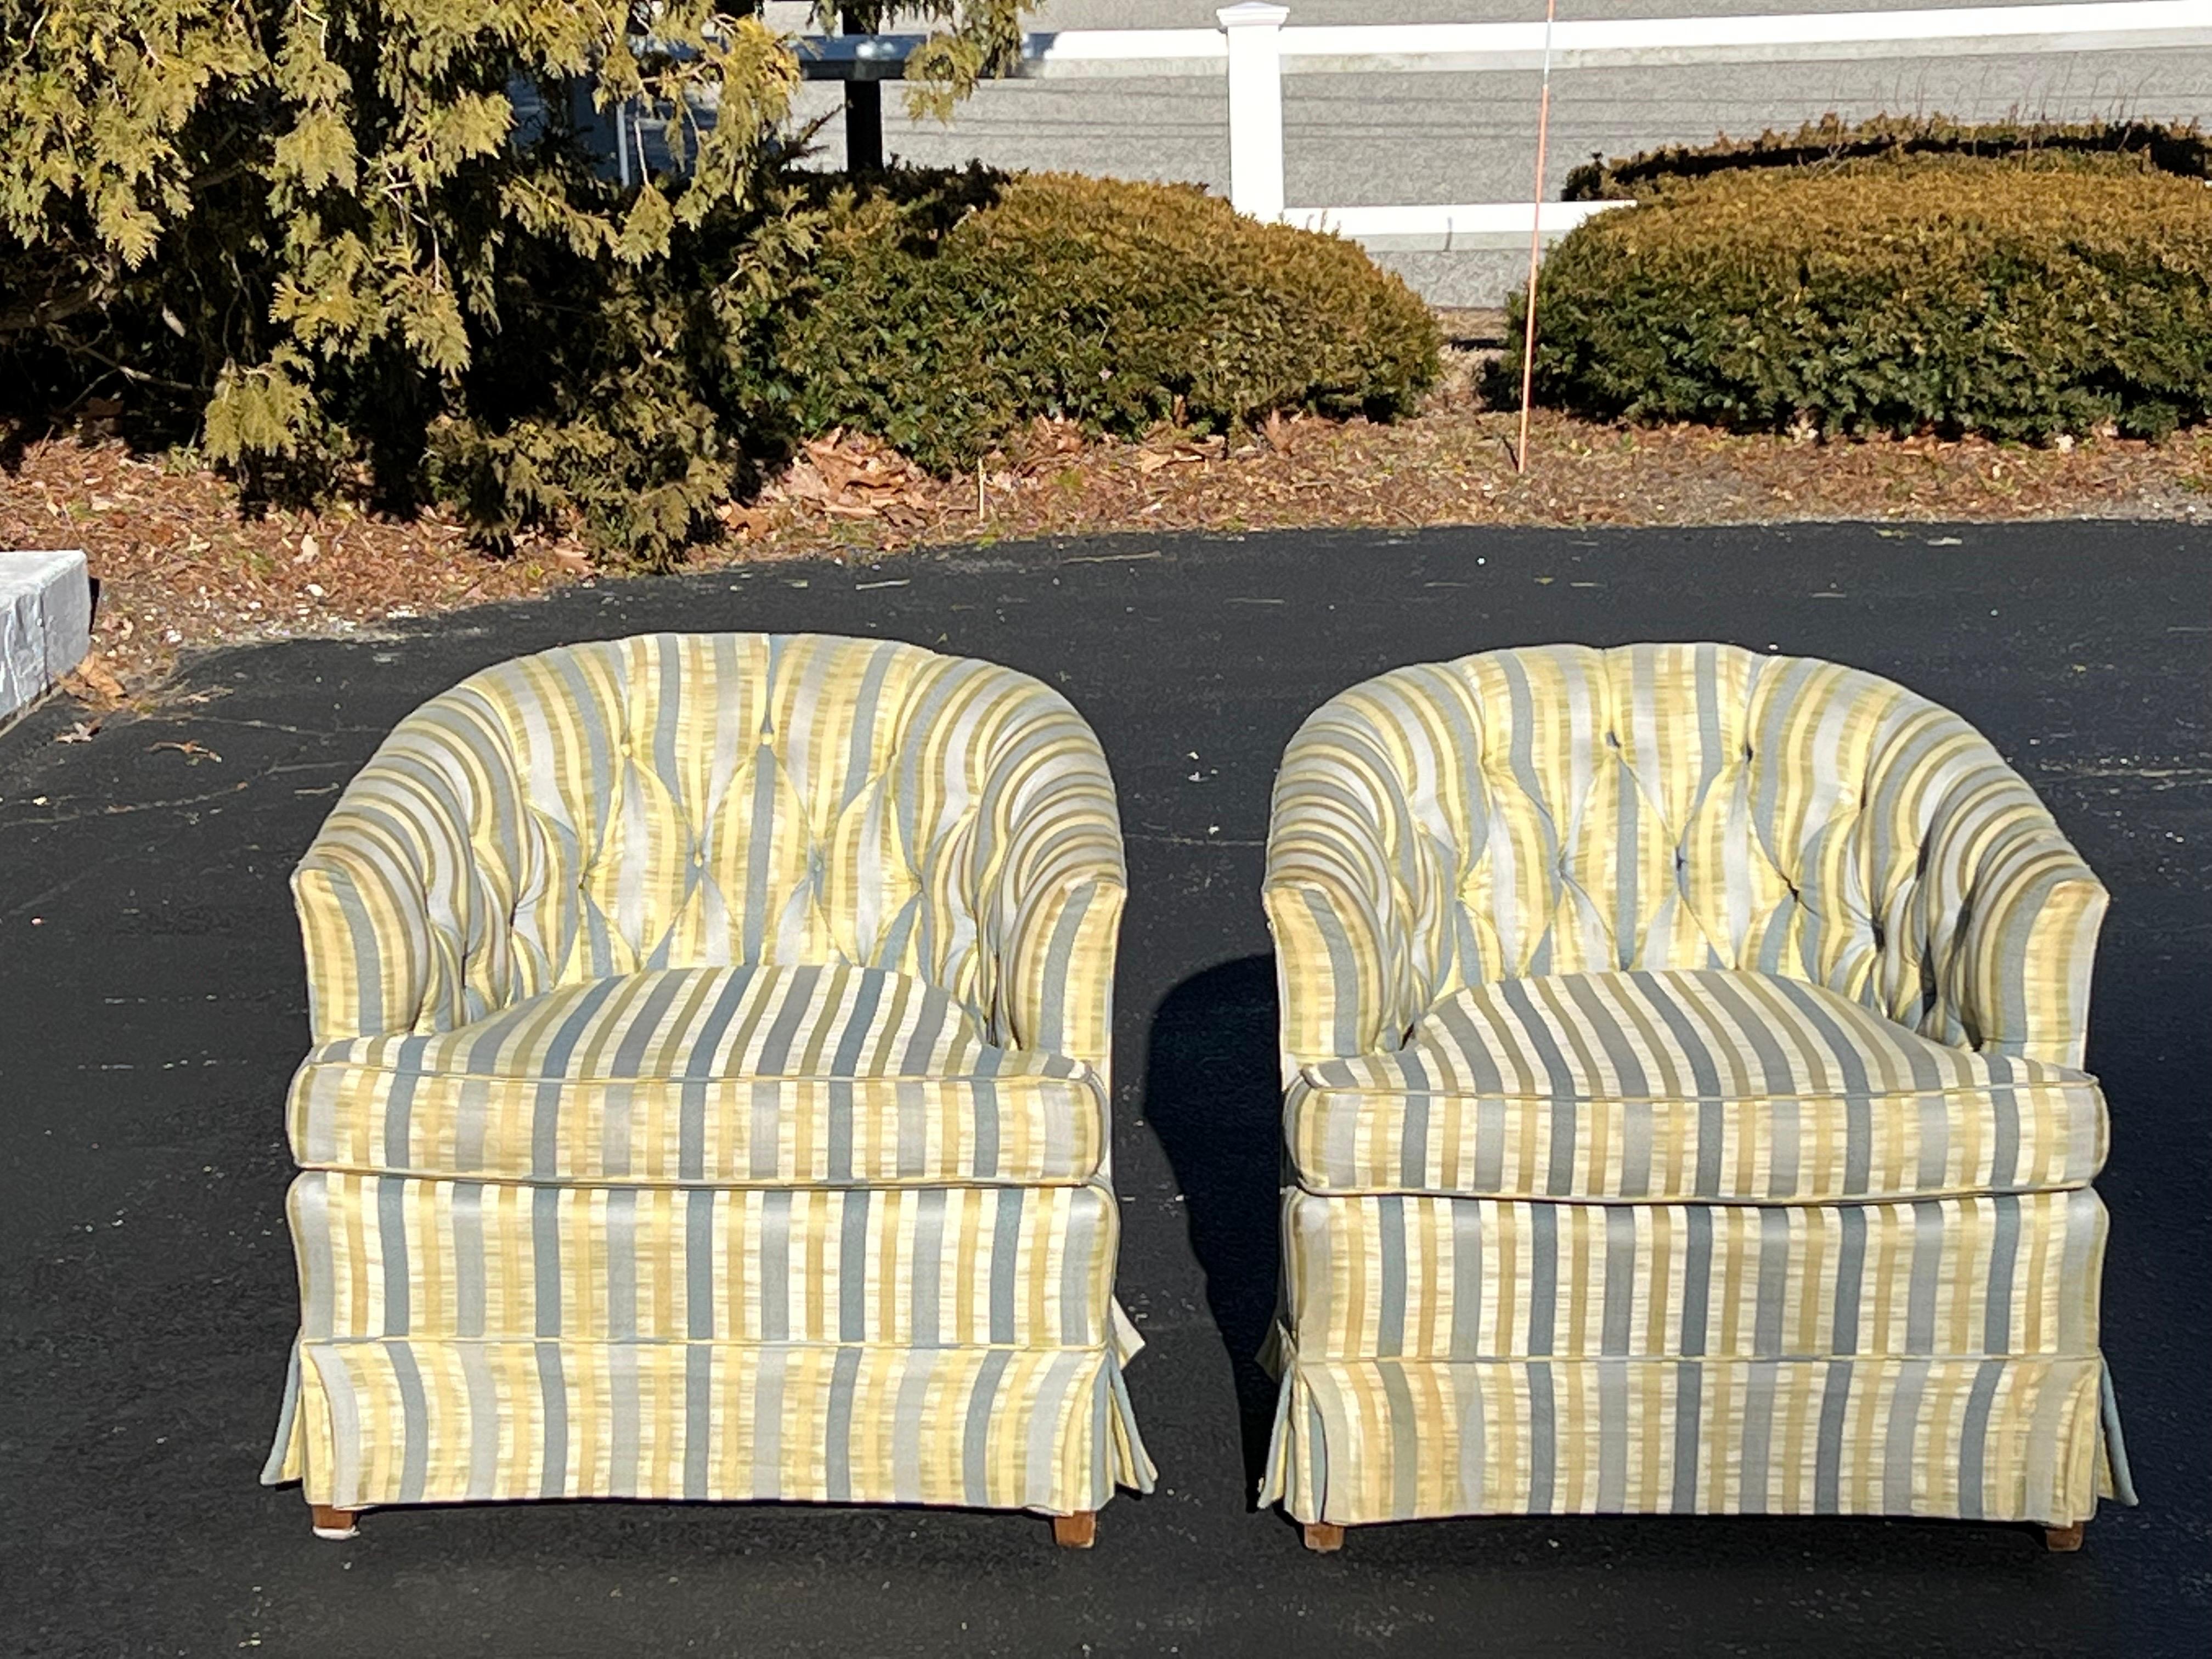 Fabulous pair of striped silk button back chairs. Classic low profile cube shape with button back top. Pleated skirt base with solid wooden feet. Nice for a living room or boudoir. Please request a custom shipping rate since the pre quote is not